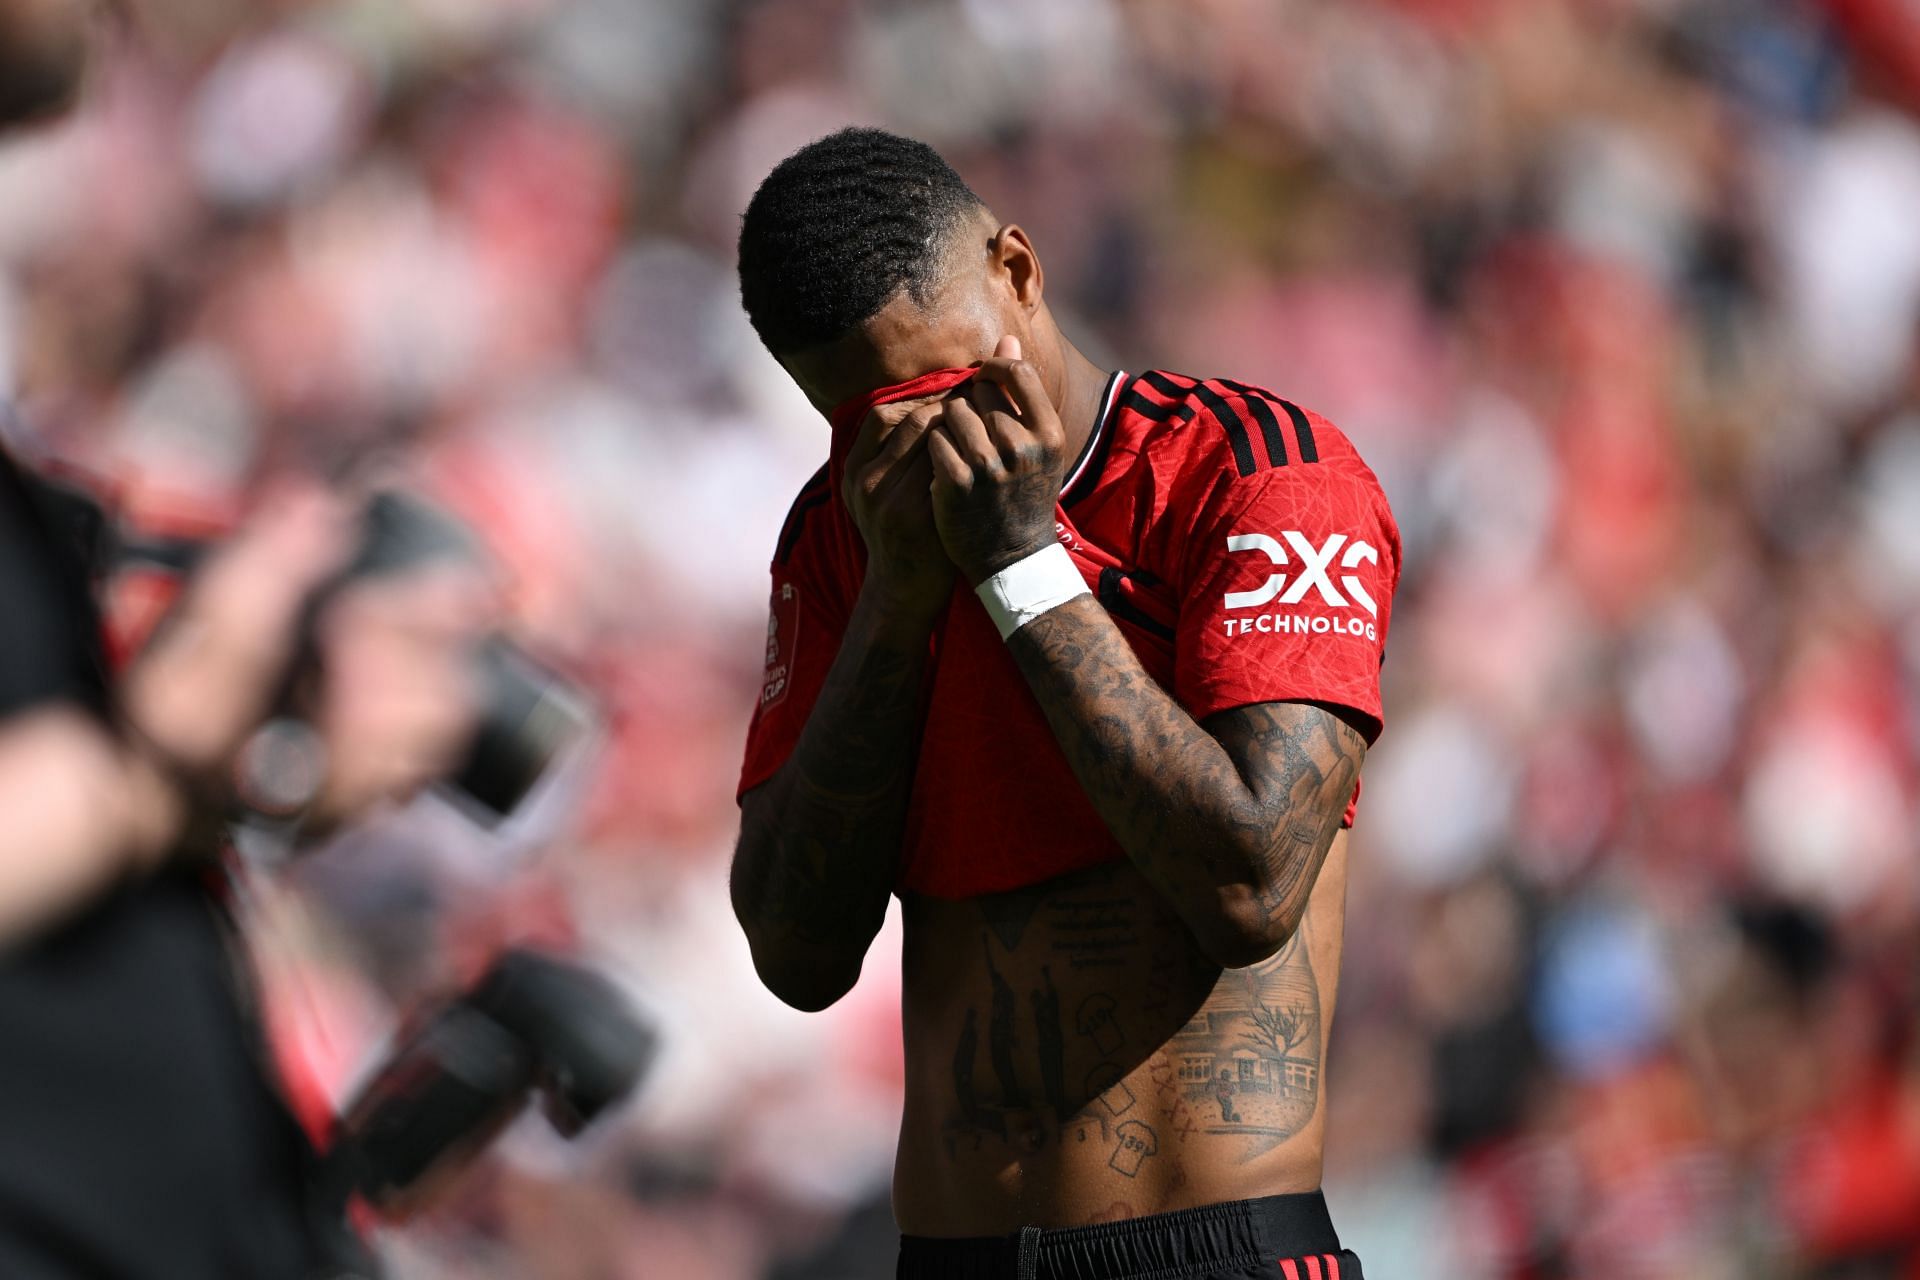 "Thanks to the fans that stood by me" Manchester United star Marcus